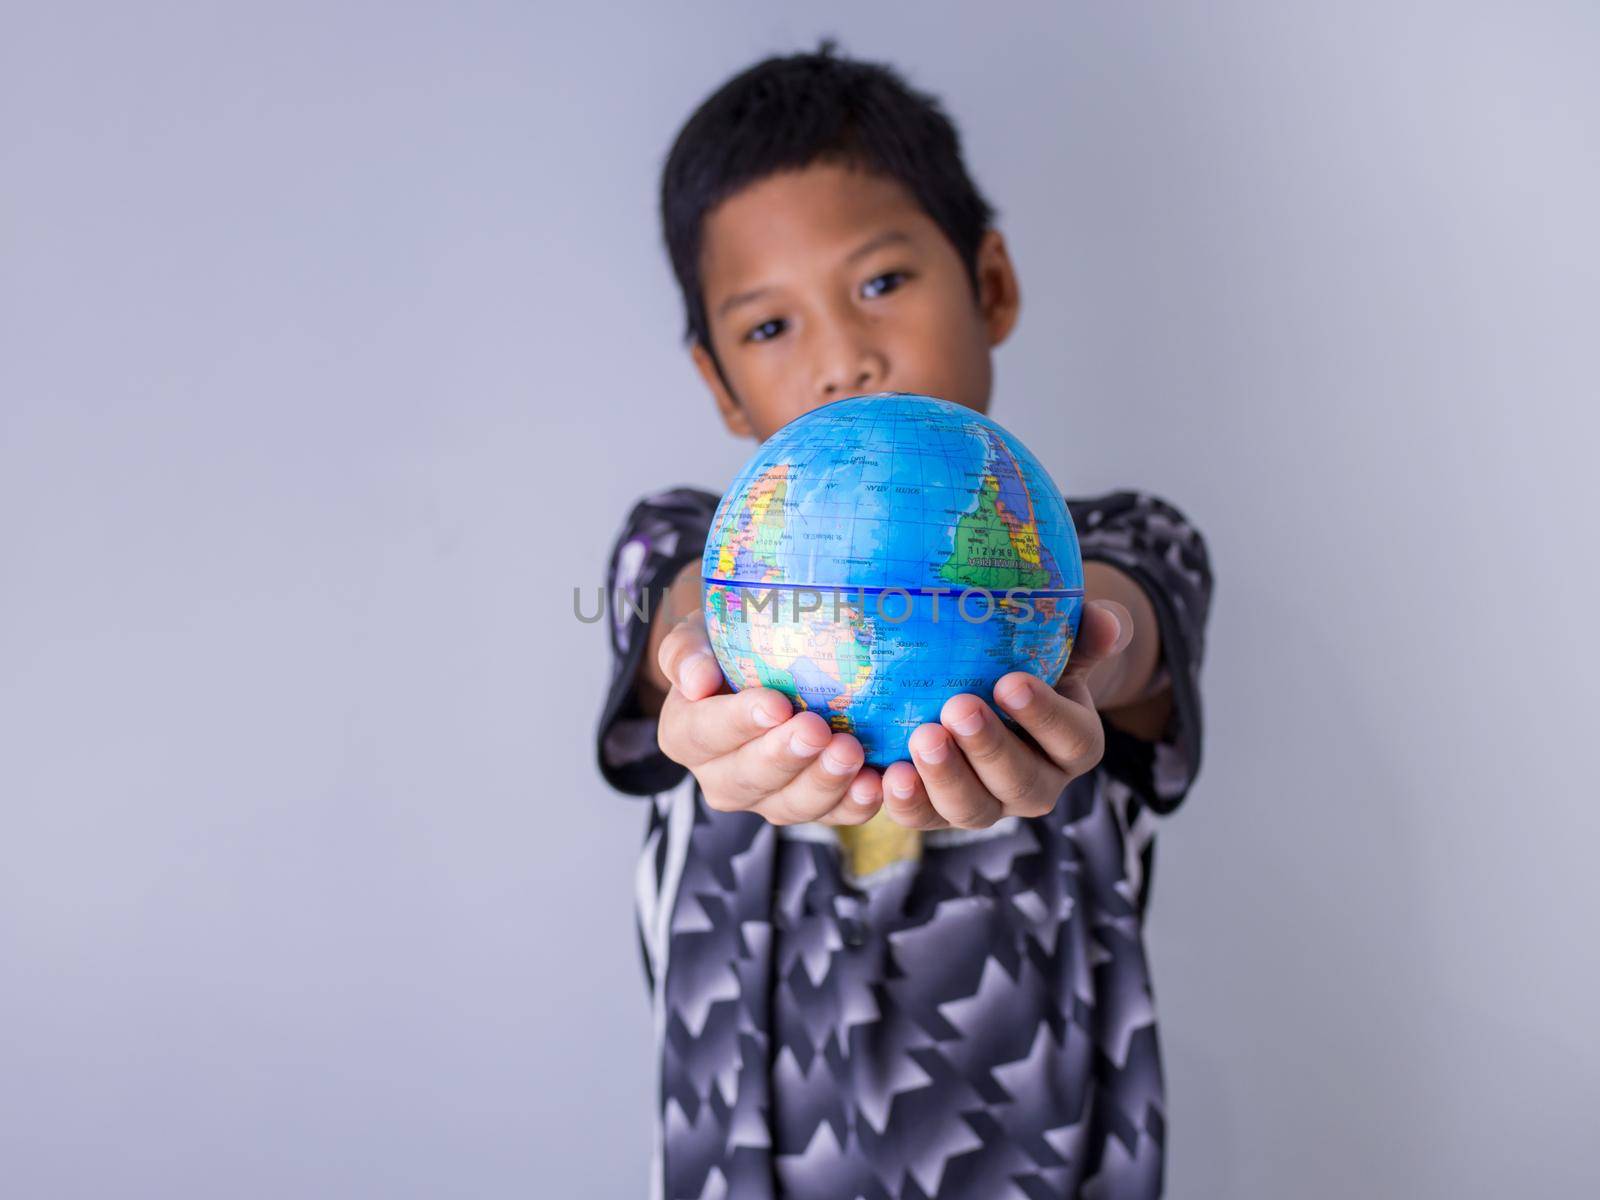 boy holding a globe stand out in front Show the power of the new generation to continue to develop our world. by Unimages2527